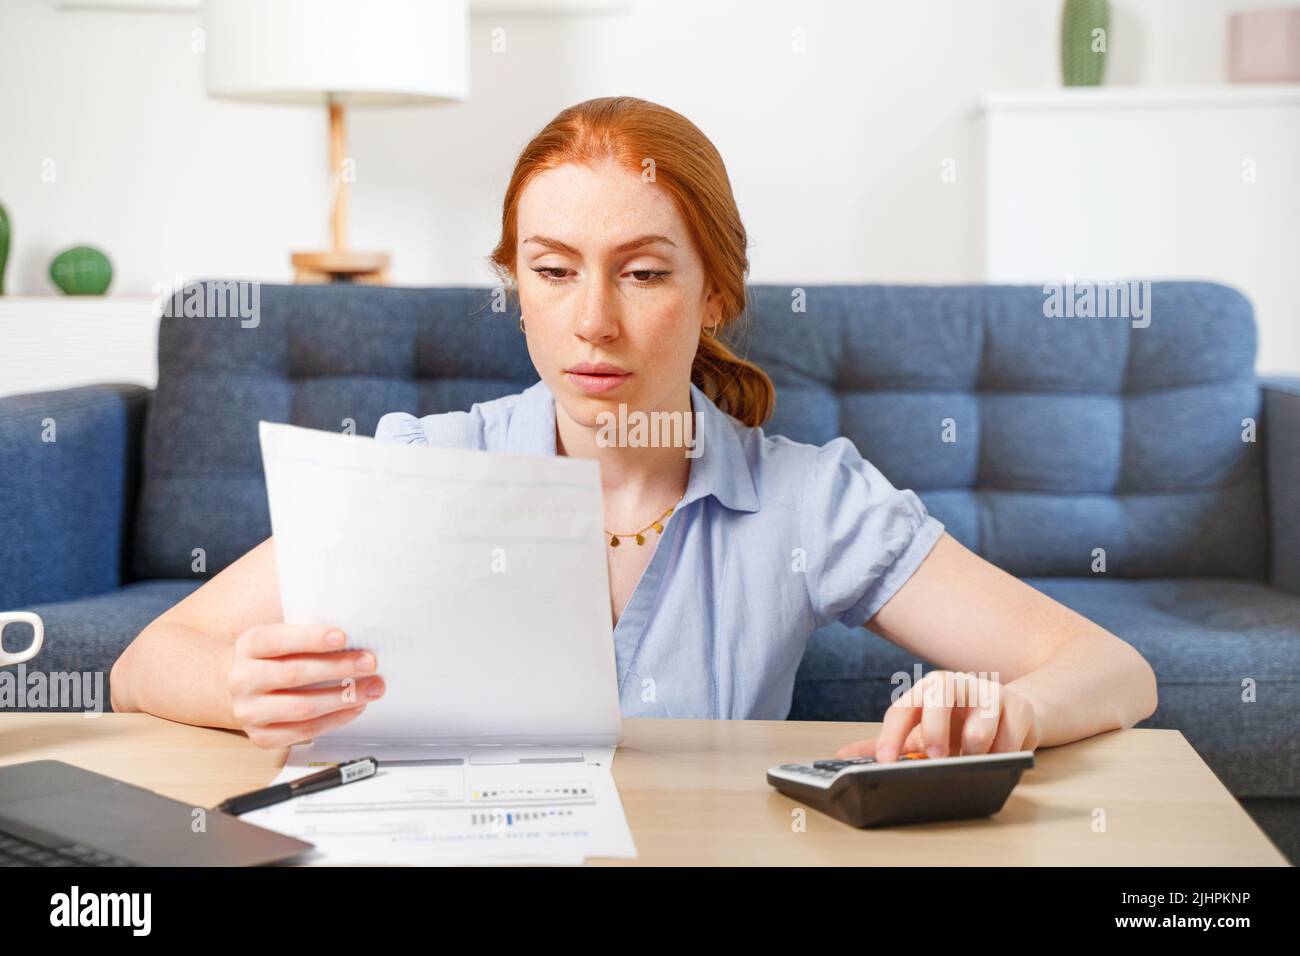 One woman examining documents and using laptop while working at home Stock Photo